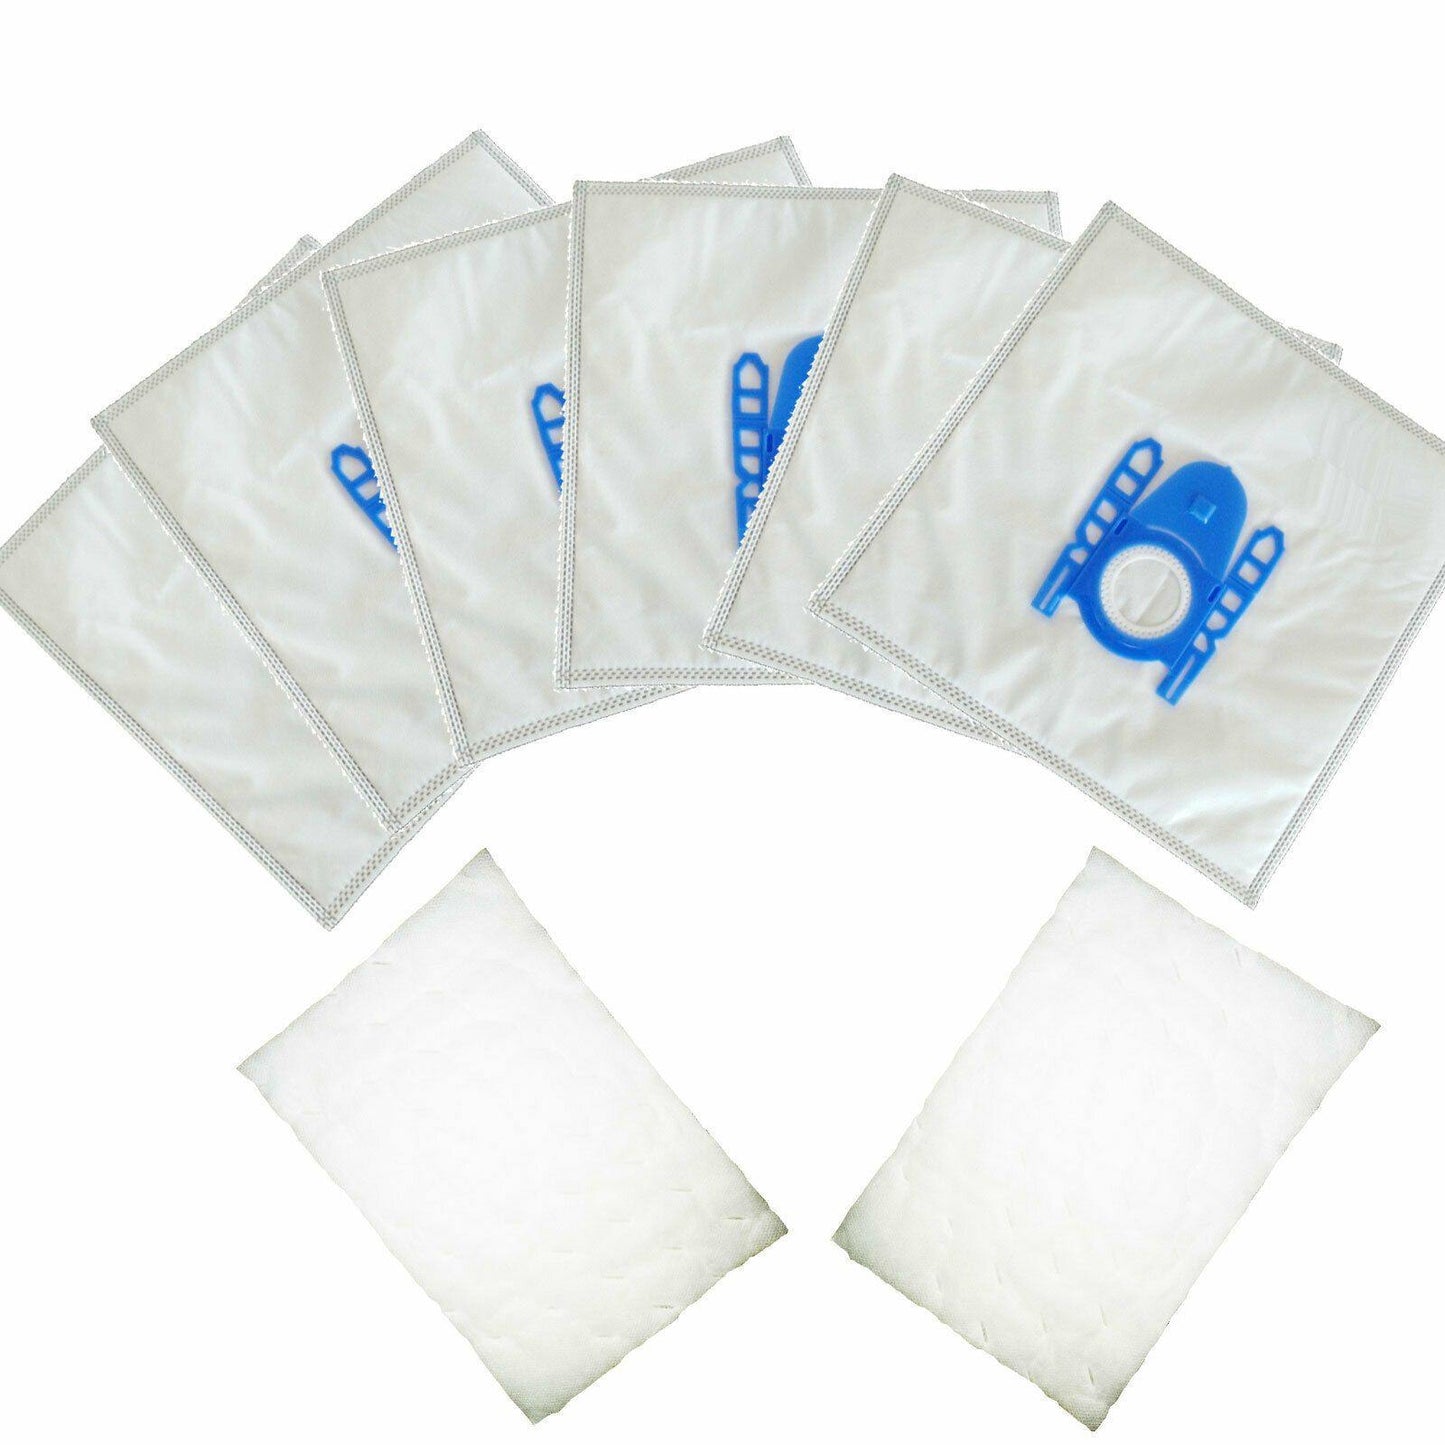 6X Vacuum Cleaner Bags & 2 Filters For Bosch Type G/G All BBZ41FGALL 17000940 Sparesbarn